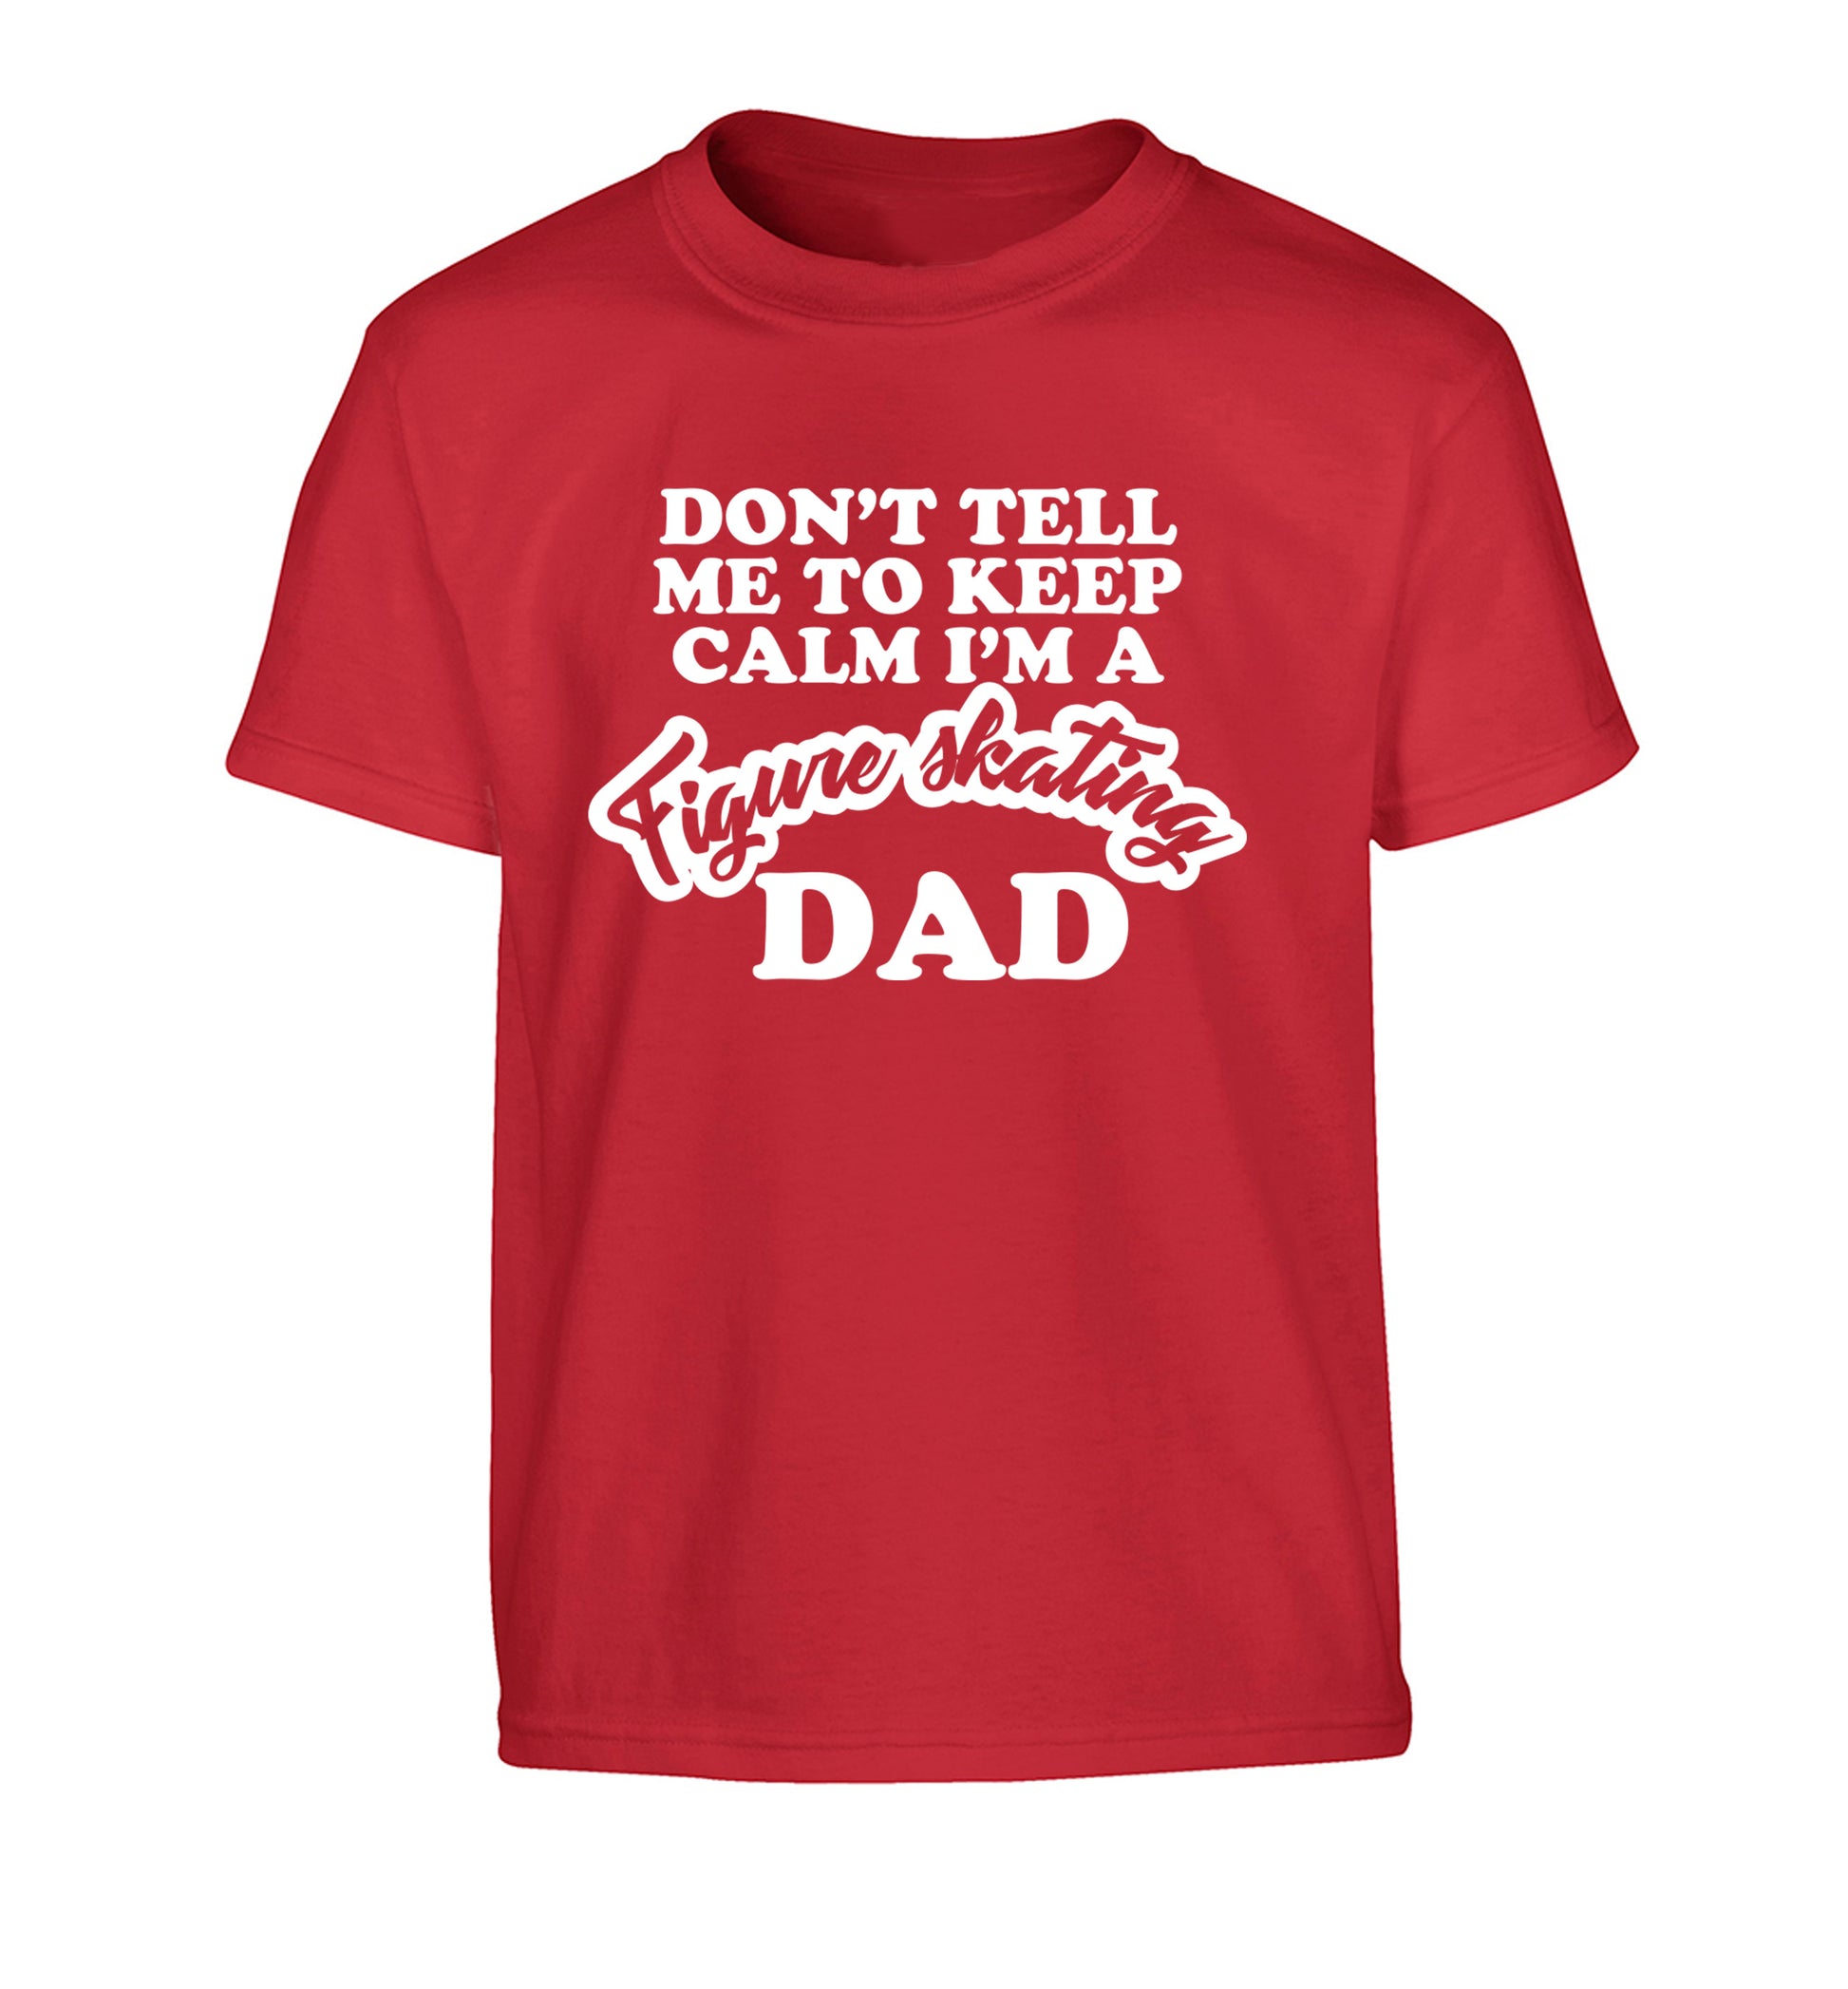 Don't tell me to keep calm I'm a figure skating dad Children's red Tshirt 12-14 Years